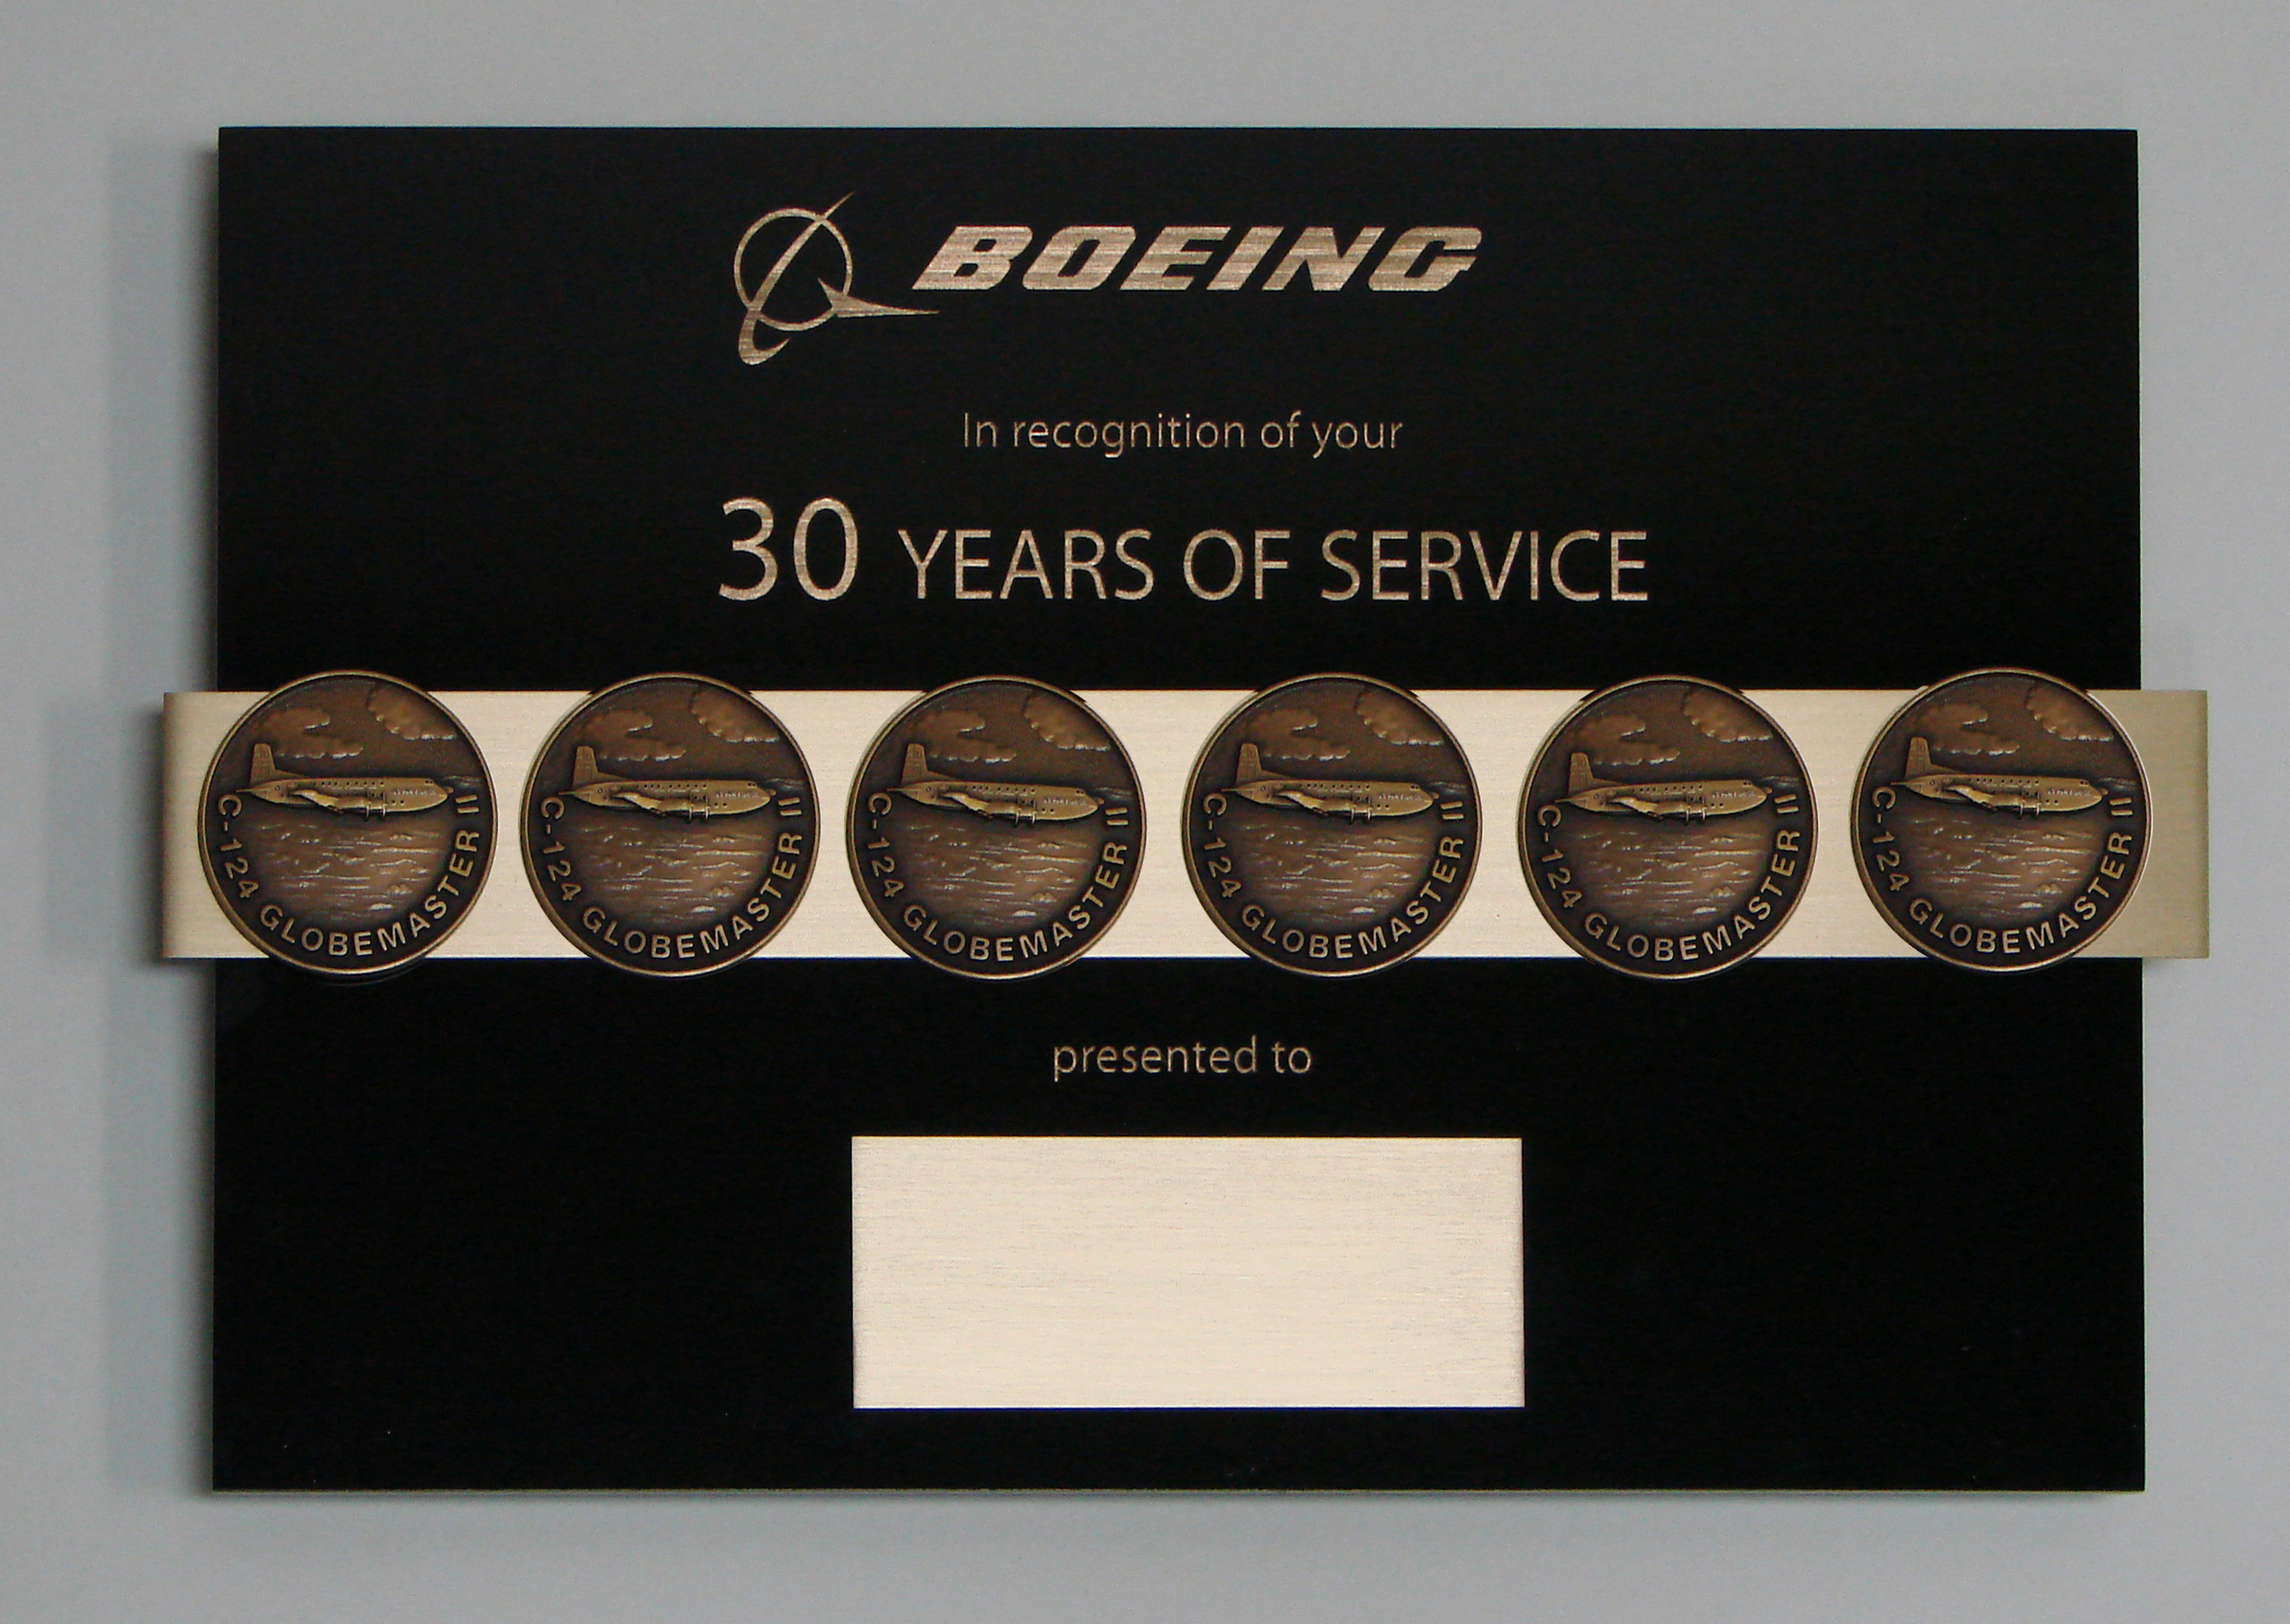 Boeing Years of Service Plaque